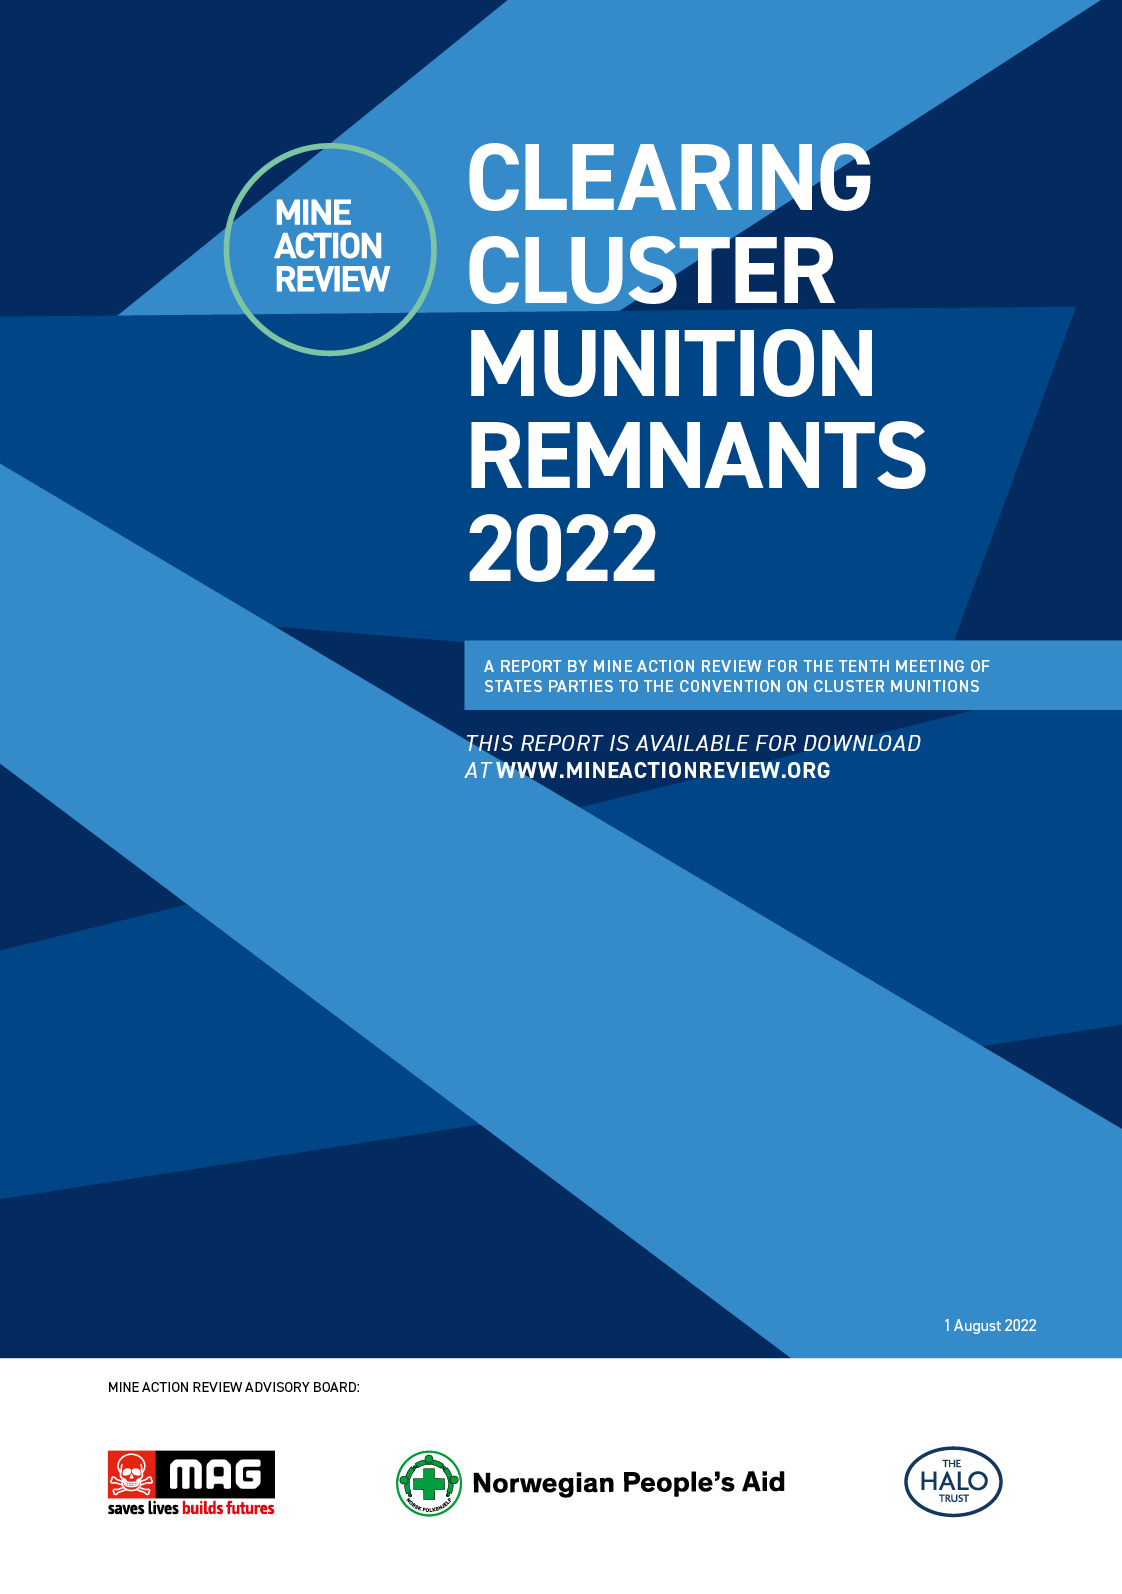 Clearing Cluster Munition Remnants 2022